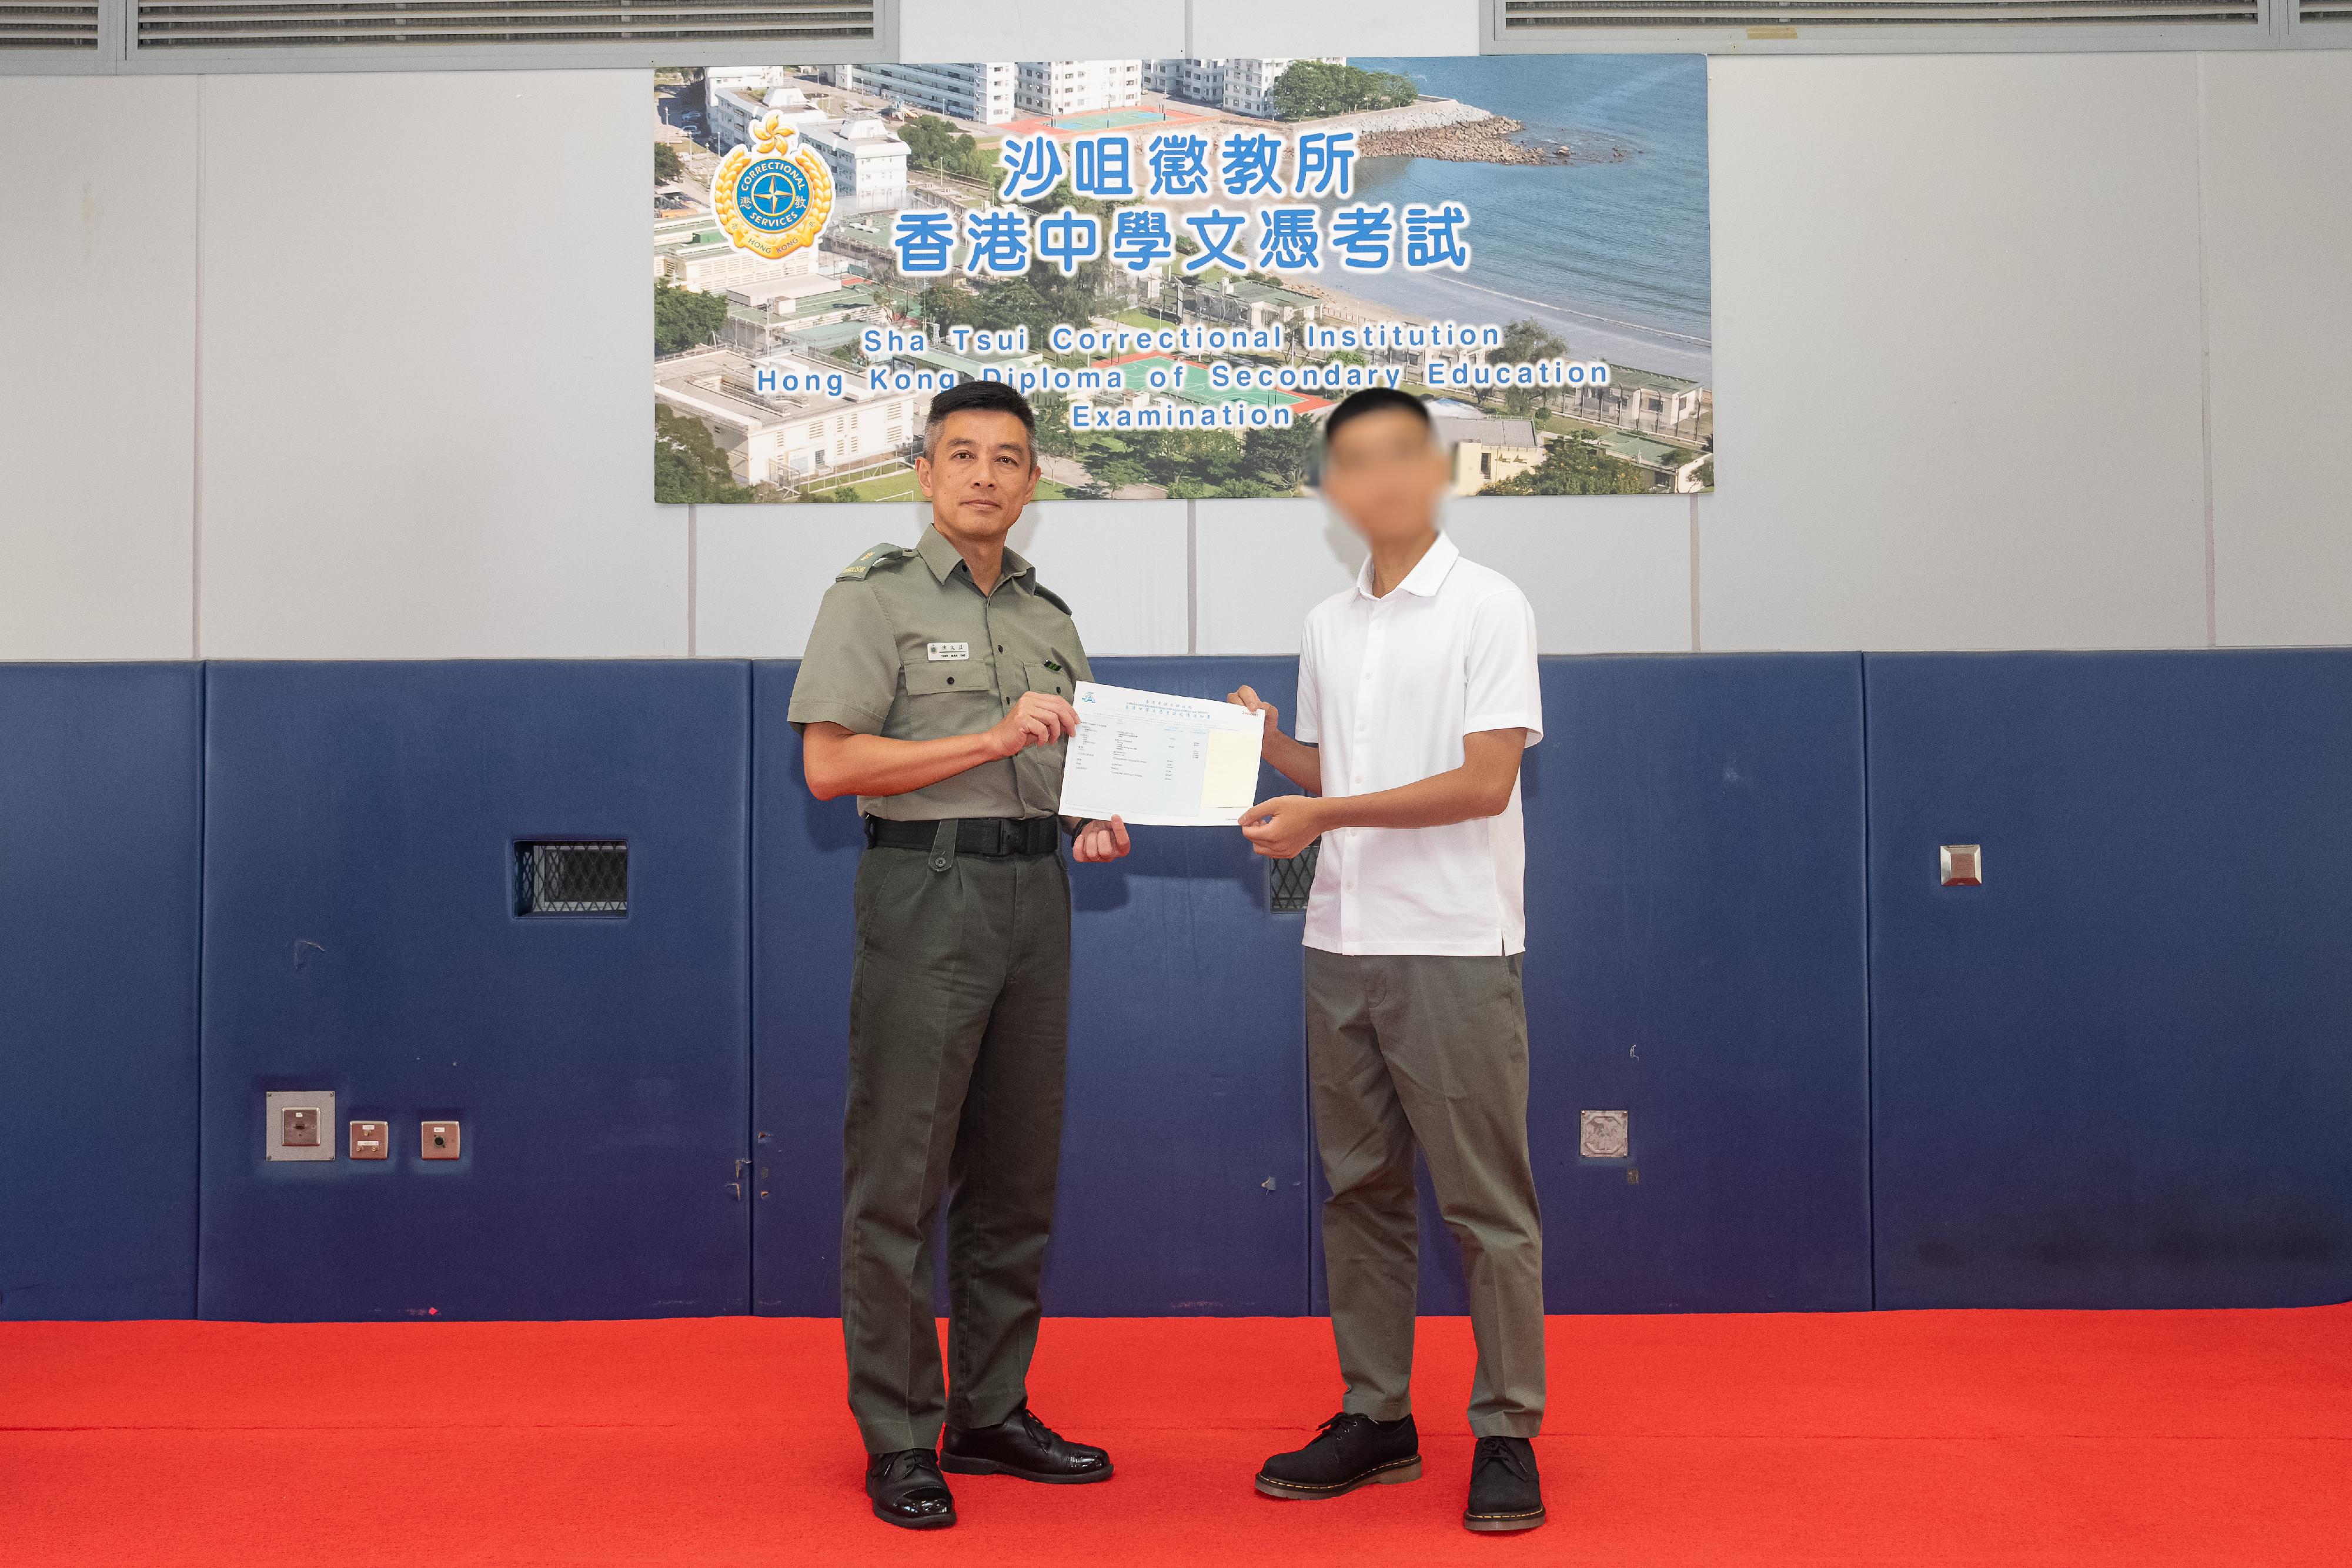 The results of the Hong Kong Diploma of Secondary Education Examination were released today (July 17). Fourteen young persons in custody enrolled in the examination this year. Photo shows the Superintendent of Sha Tsui Correctional Institution, Mr Chan Man-yat (left), presenting an examination certificate to a rehabilitated person.